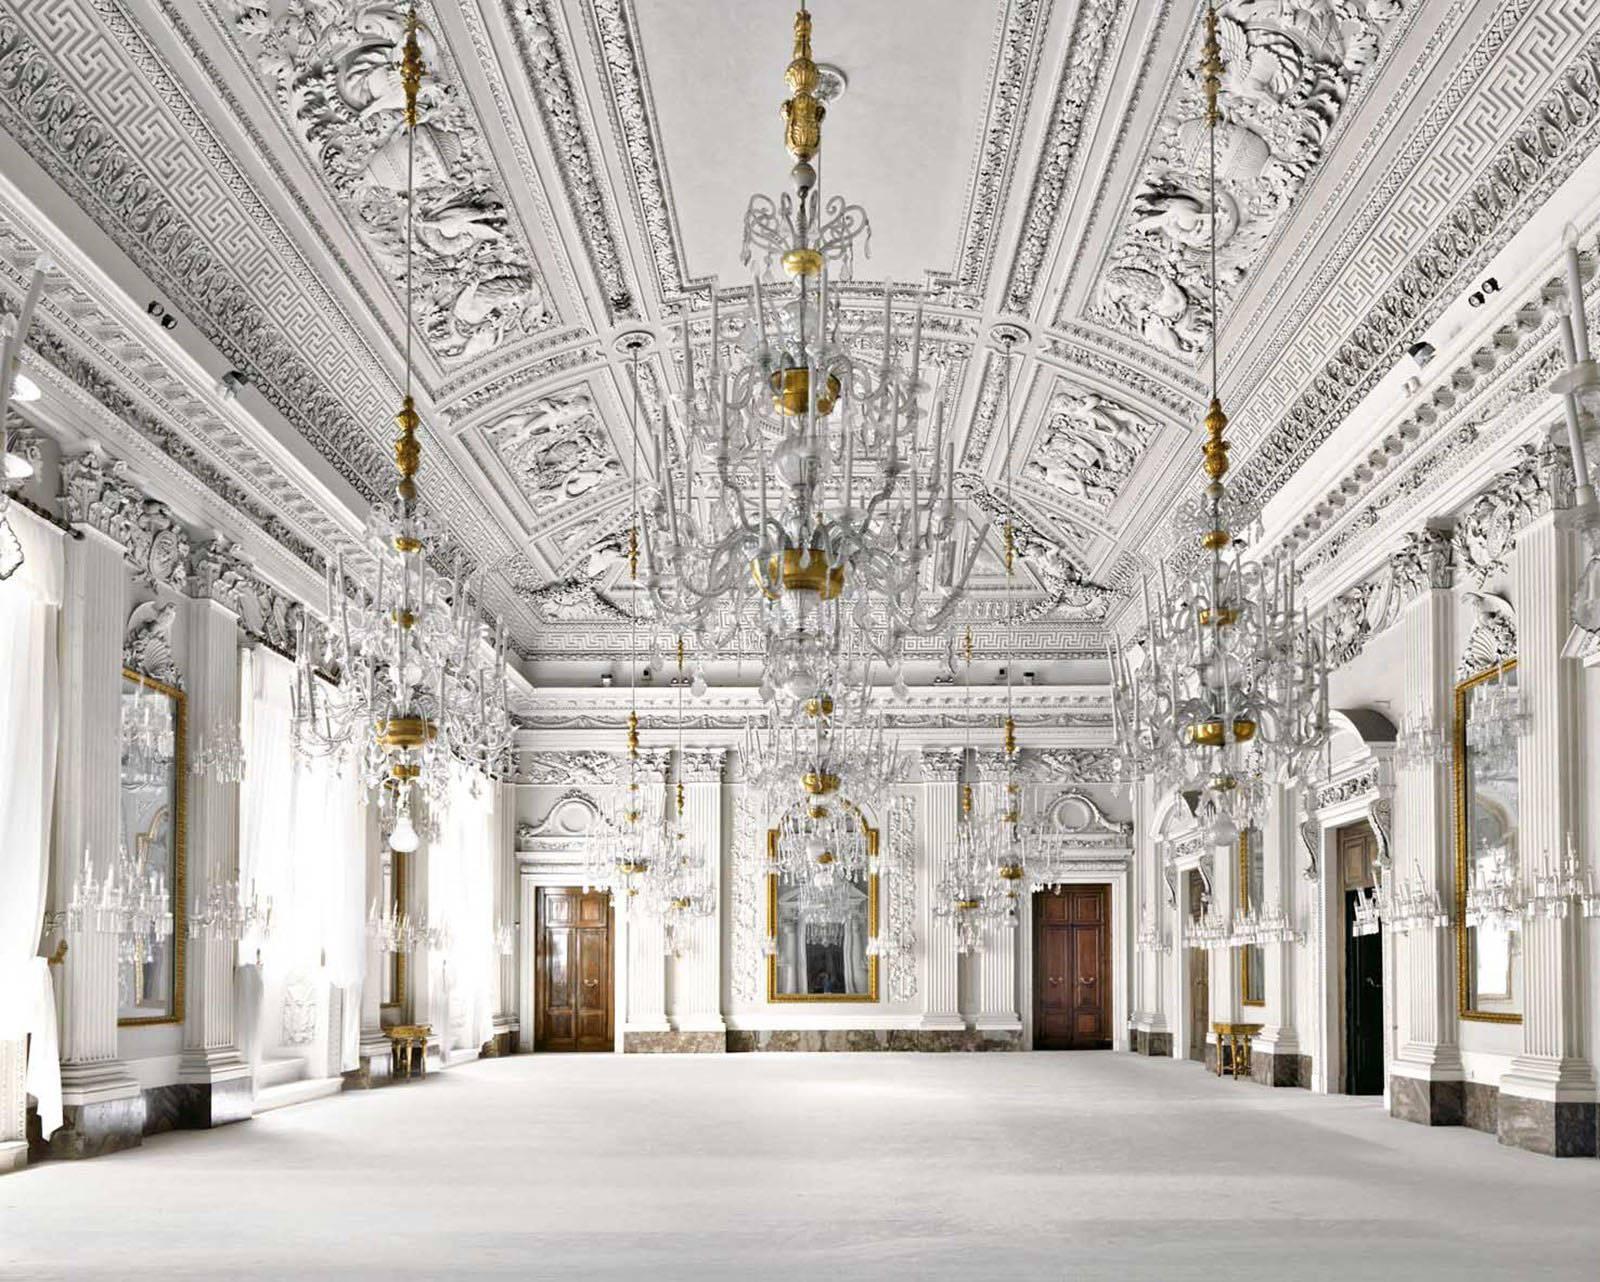 Palazzo Pitti, Sala Bianca, Firenze, 2008
Chromogenic print
100 x 120 cm
Edition of 5

Italian, b. 1954, Florence, Italy, based in Florence, Italy

Massimo Listri travels his native Italy and the world with his camera, photographing grand interior